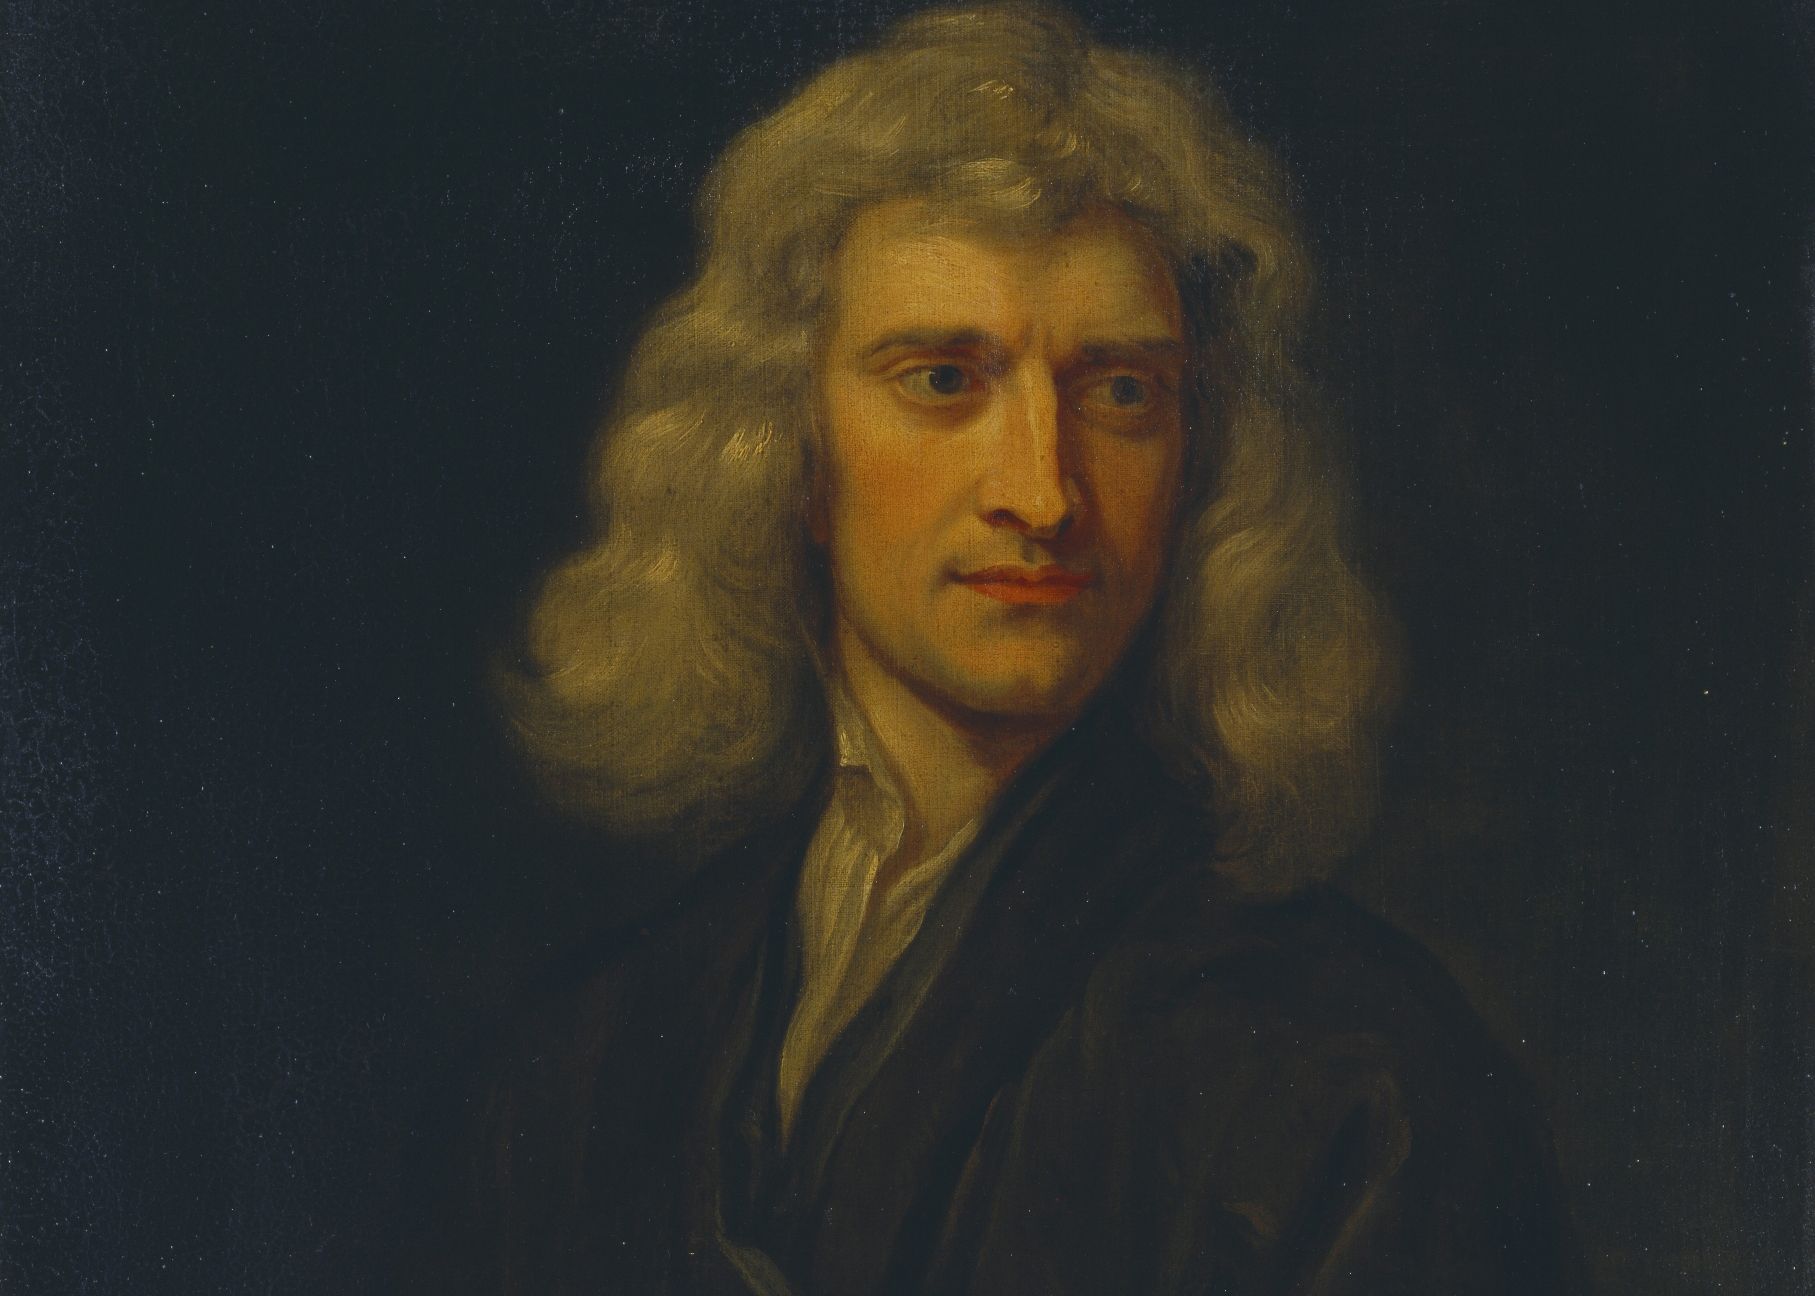 Scientists uncover hidden windmill drawing at Sir Isaac Newton's childhood home